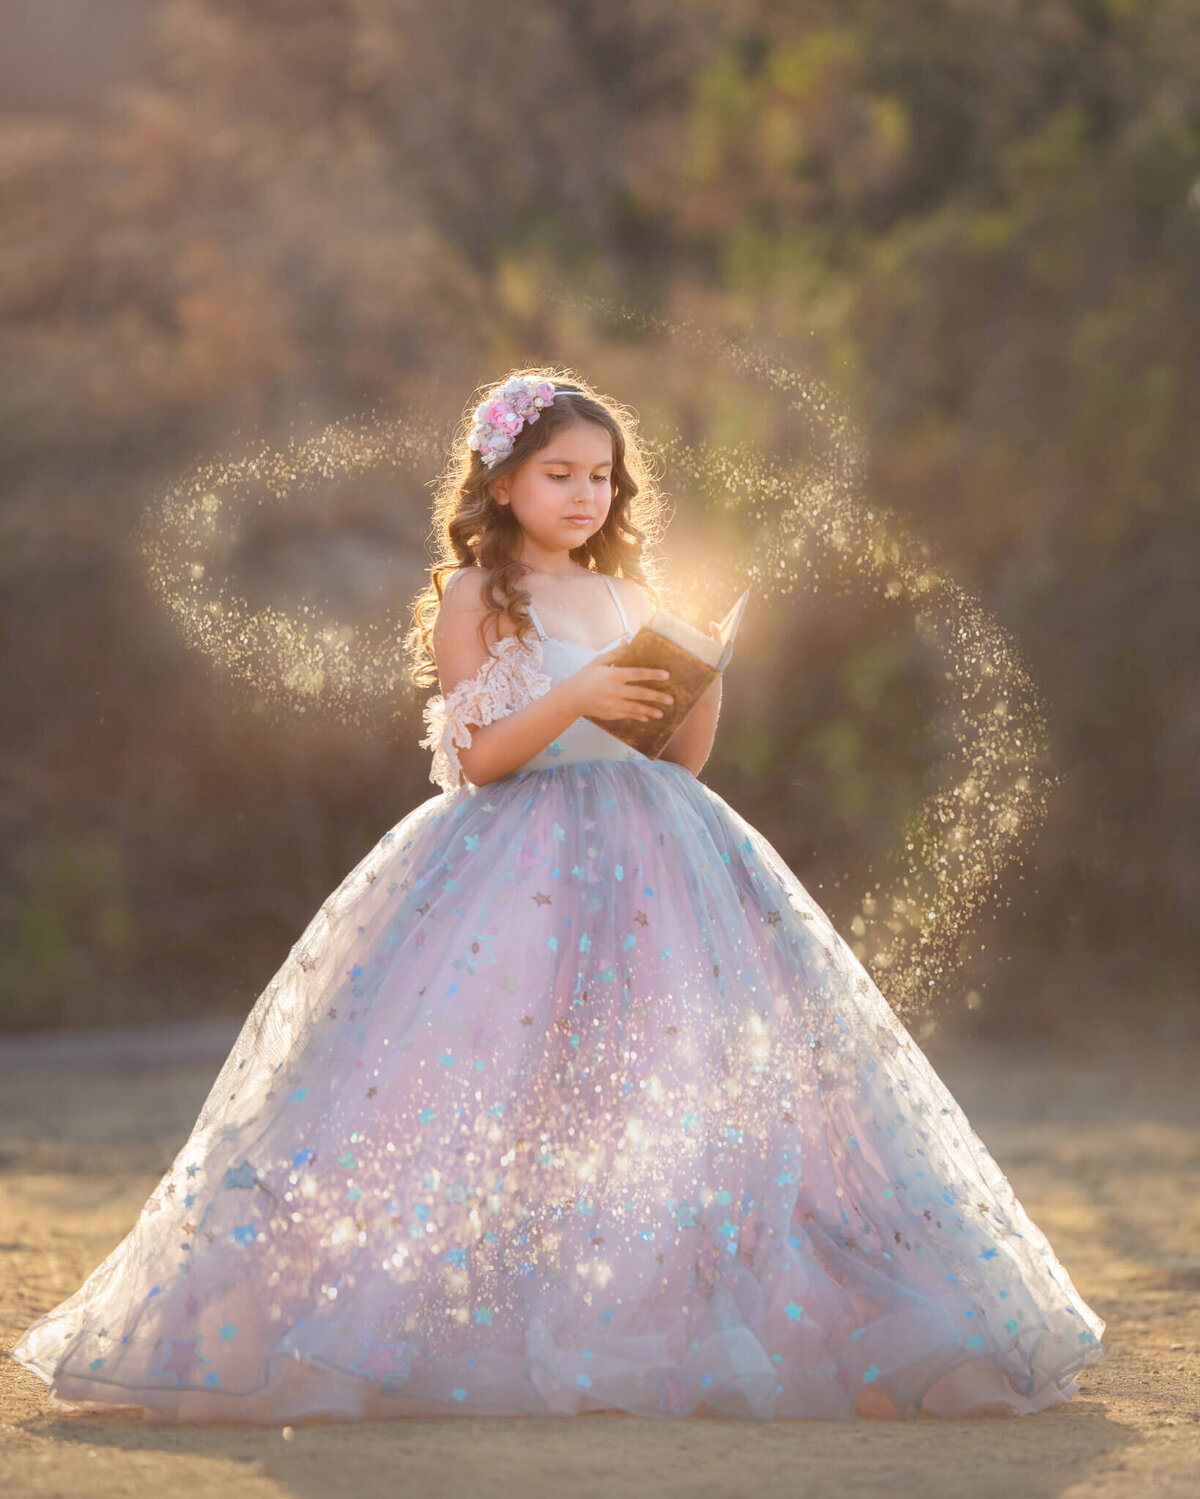 Fine art photograph of little girl in couture gown reading a book with bagical stars - Los Angeles Children’s Photographer